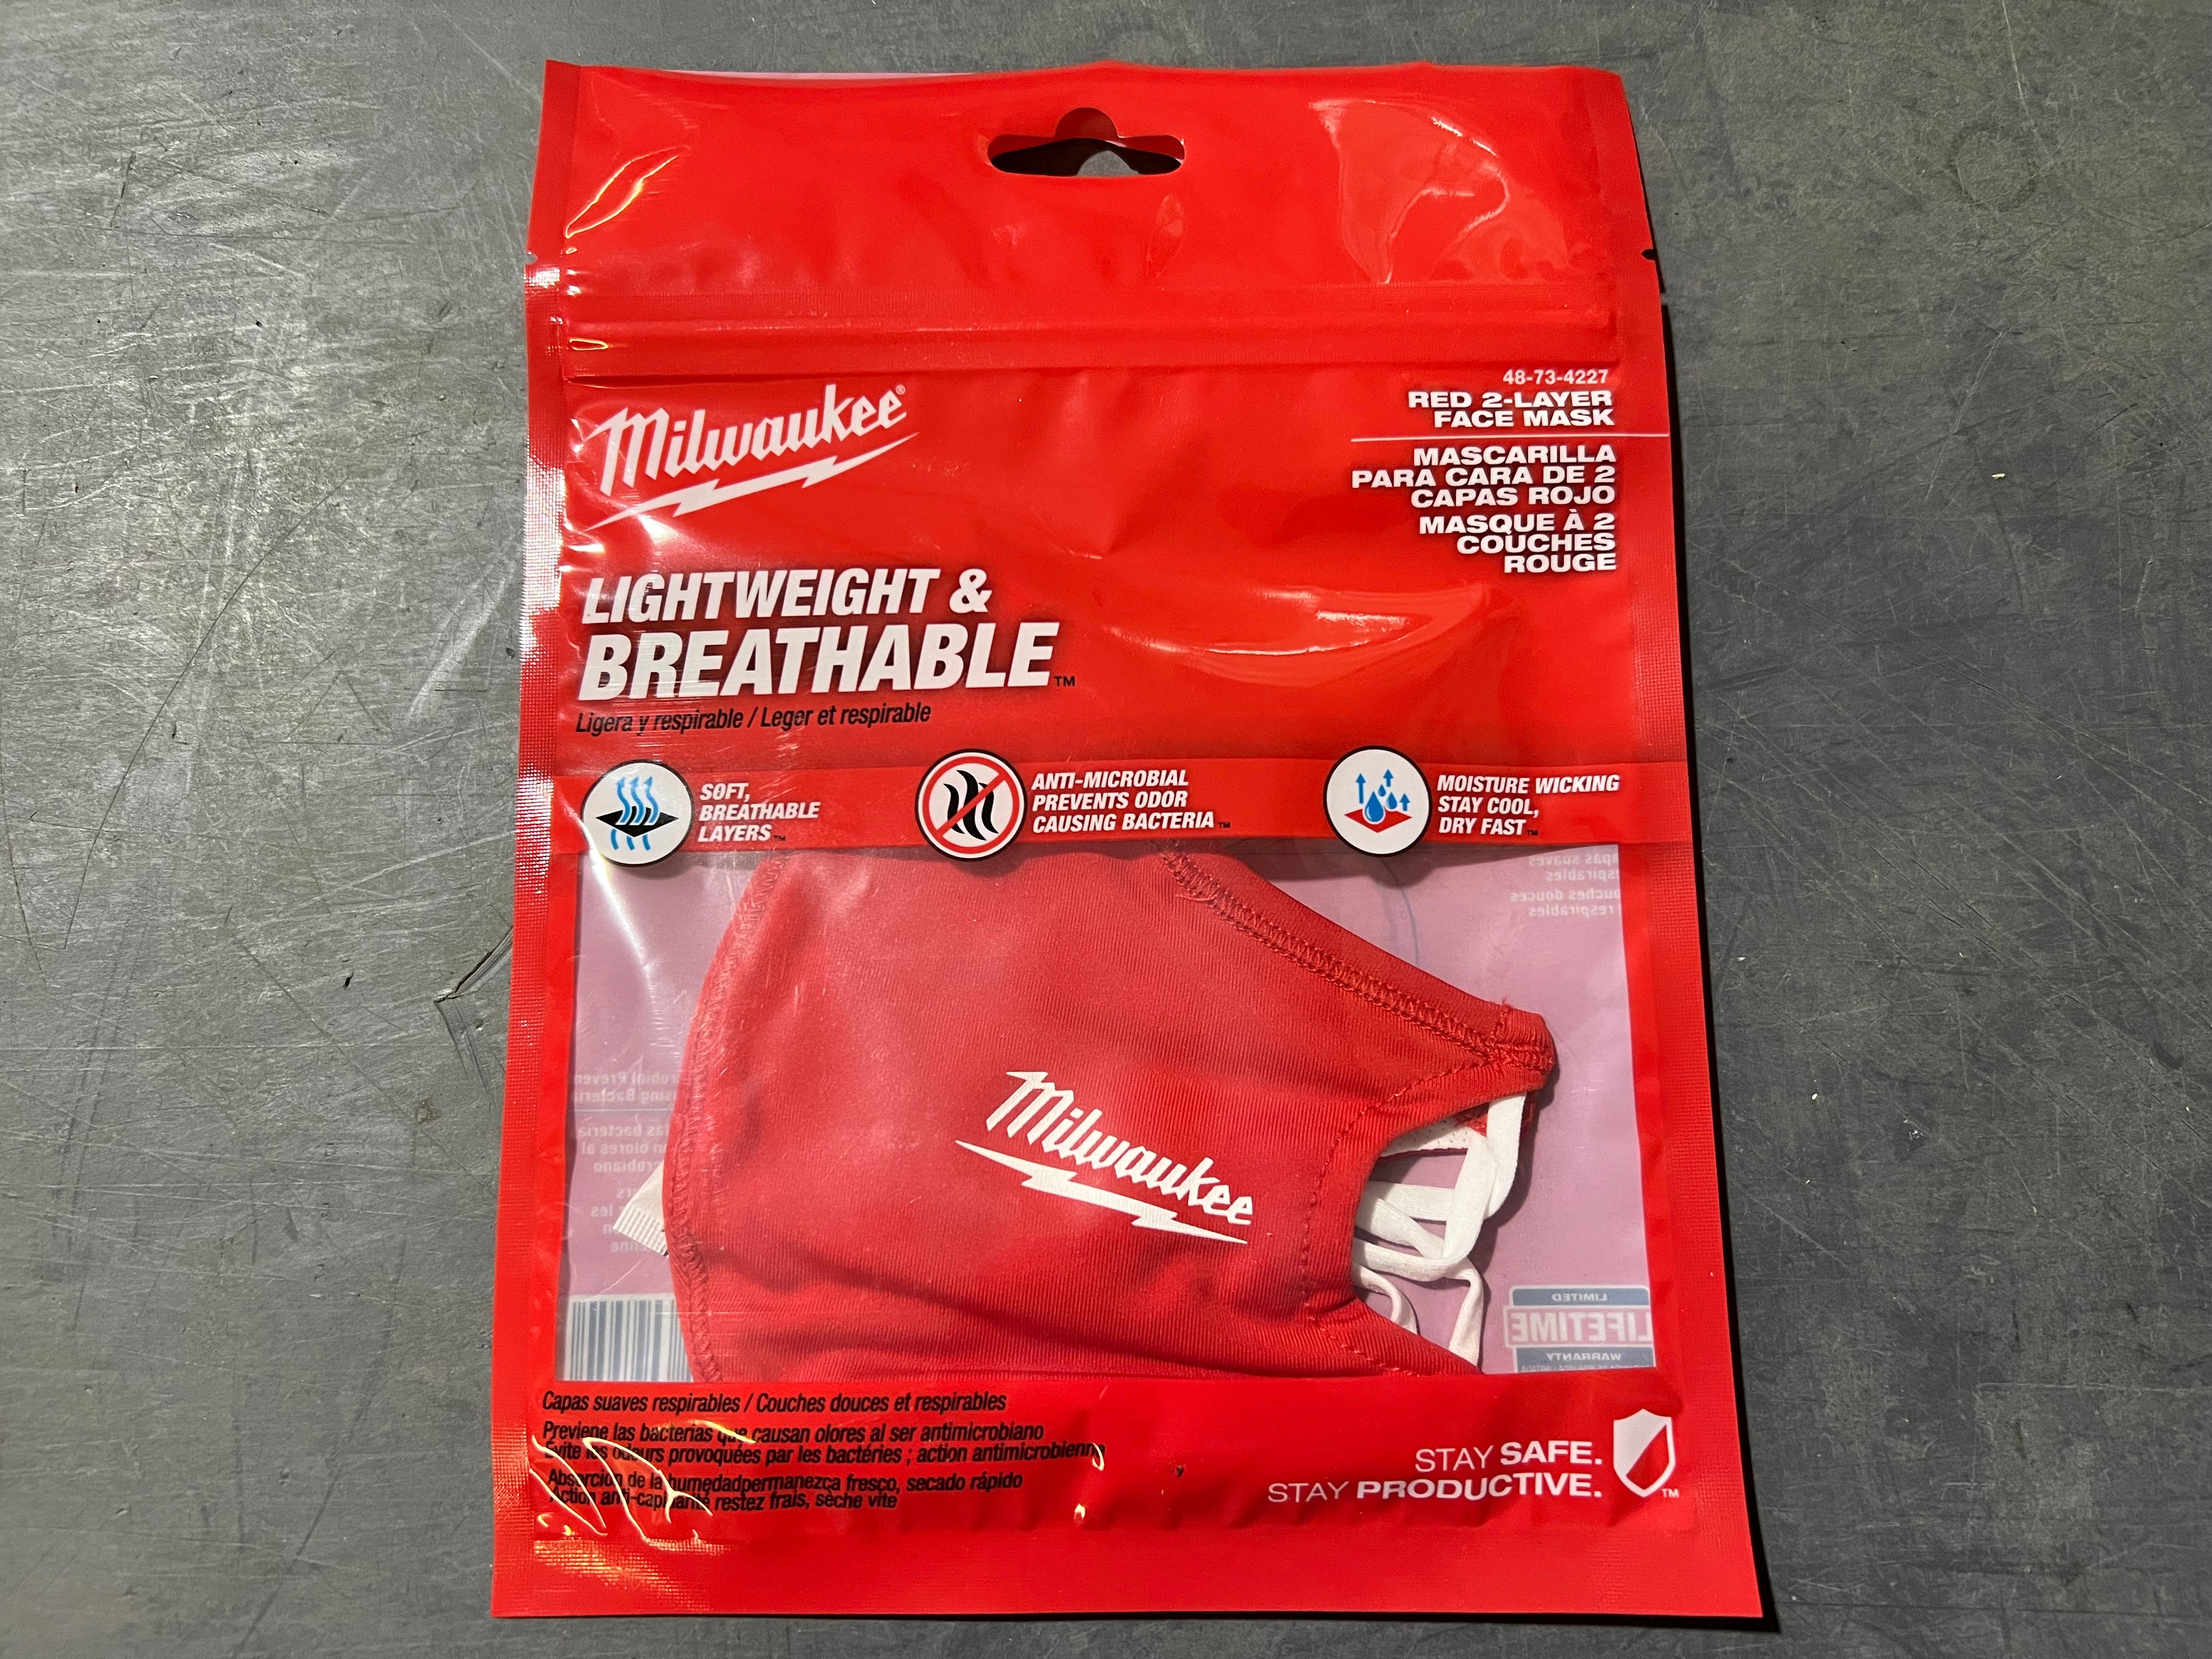 Milwaukee 2-layer Face Dust Mask Red